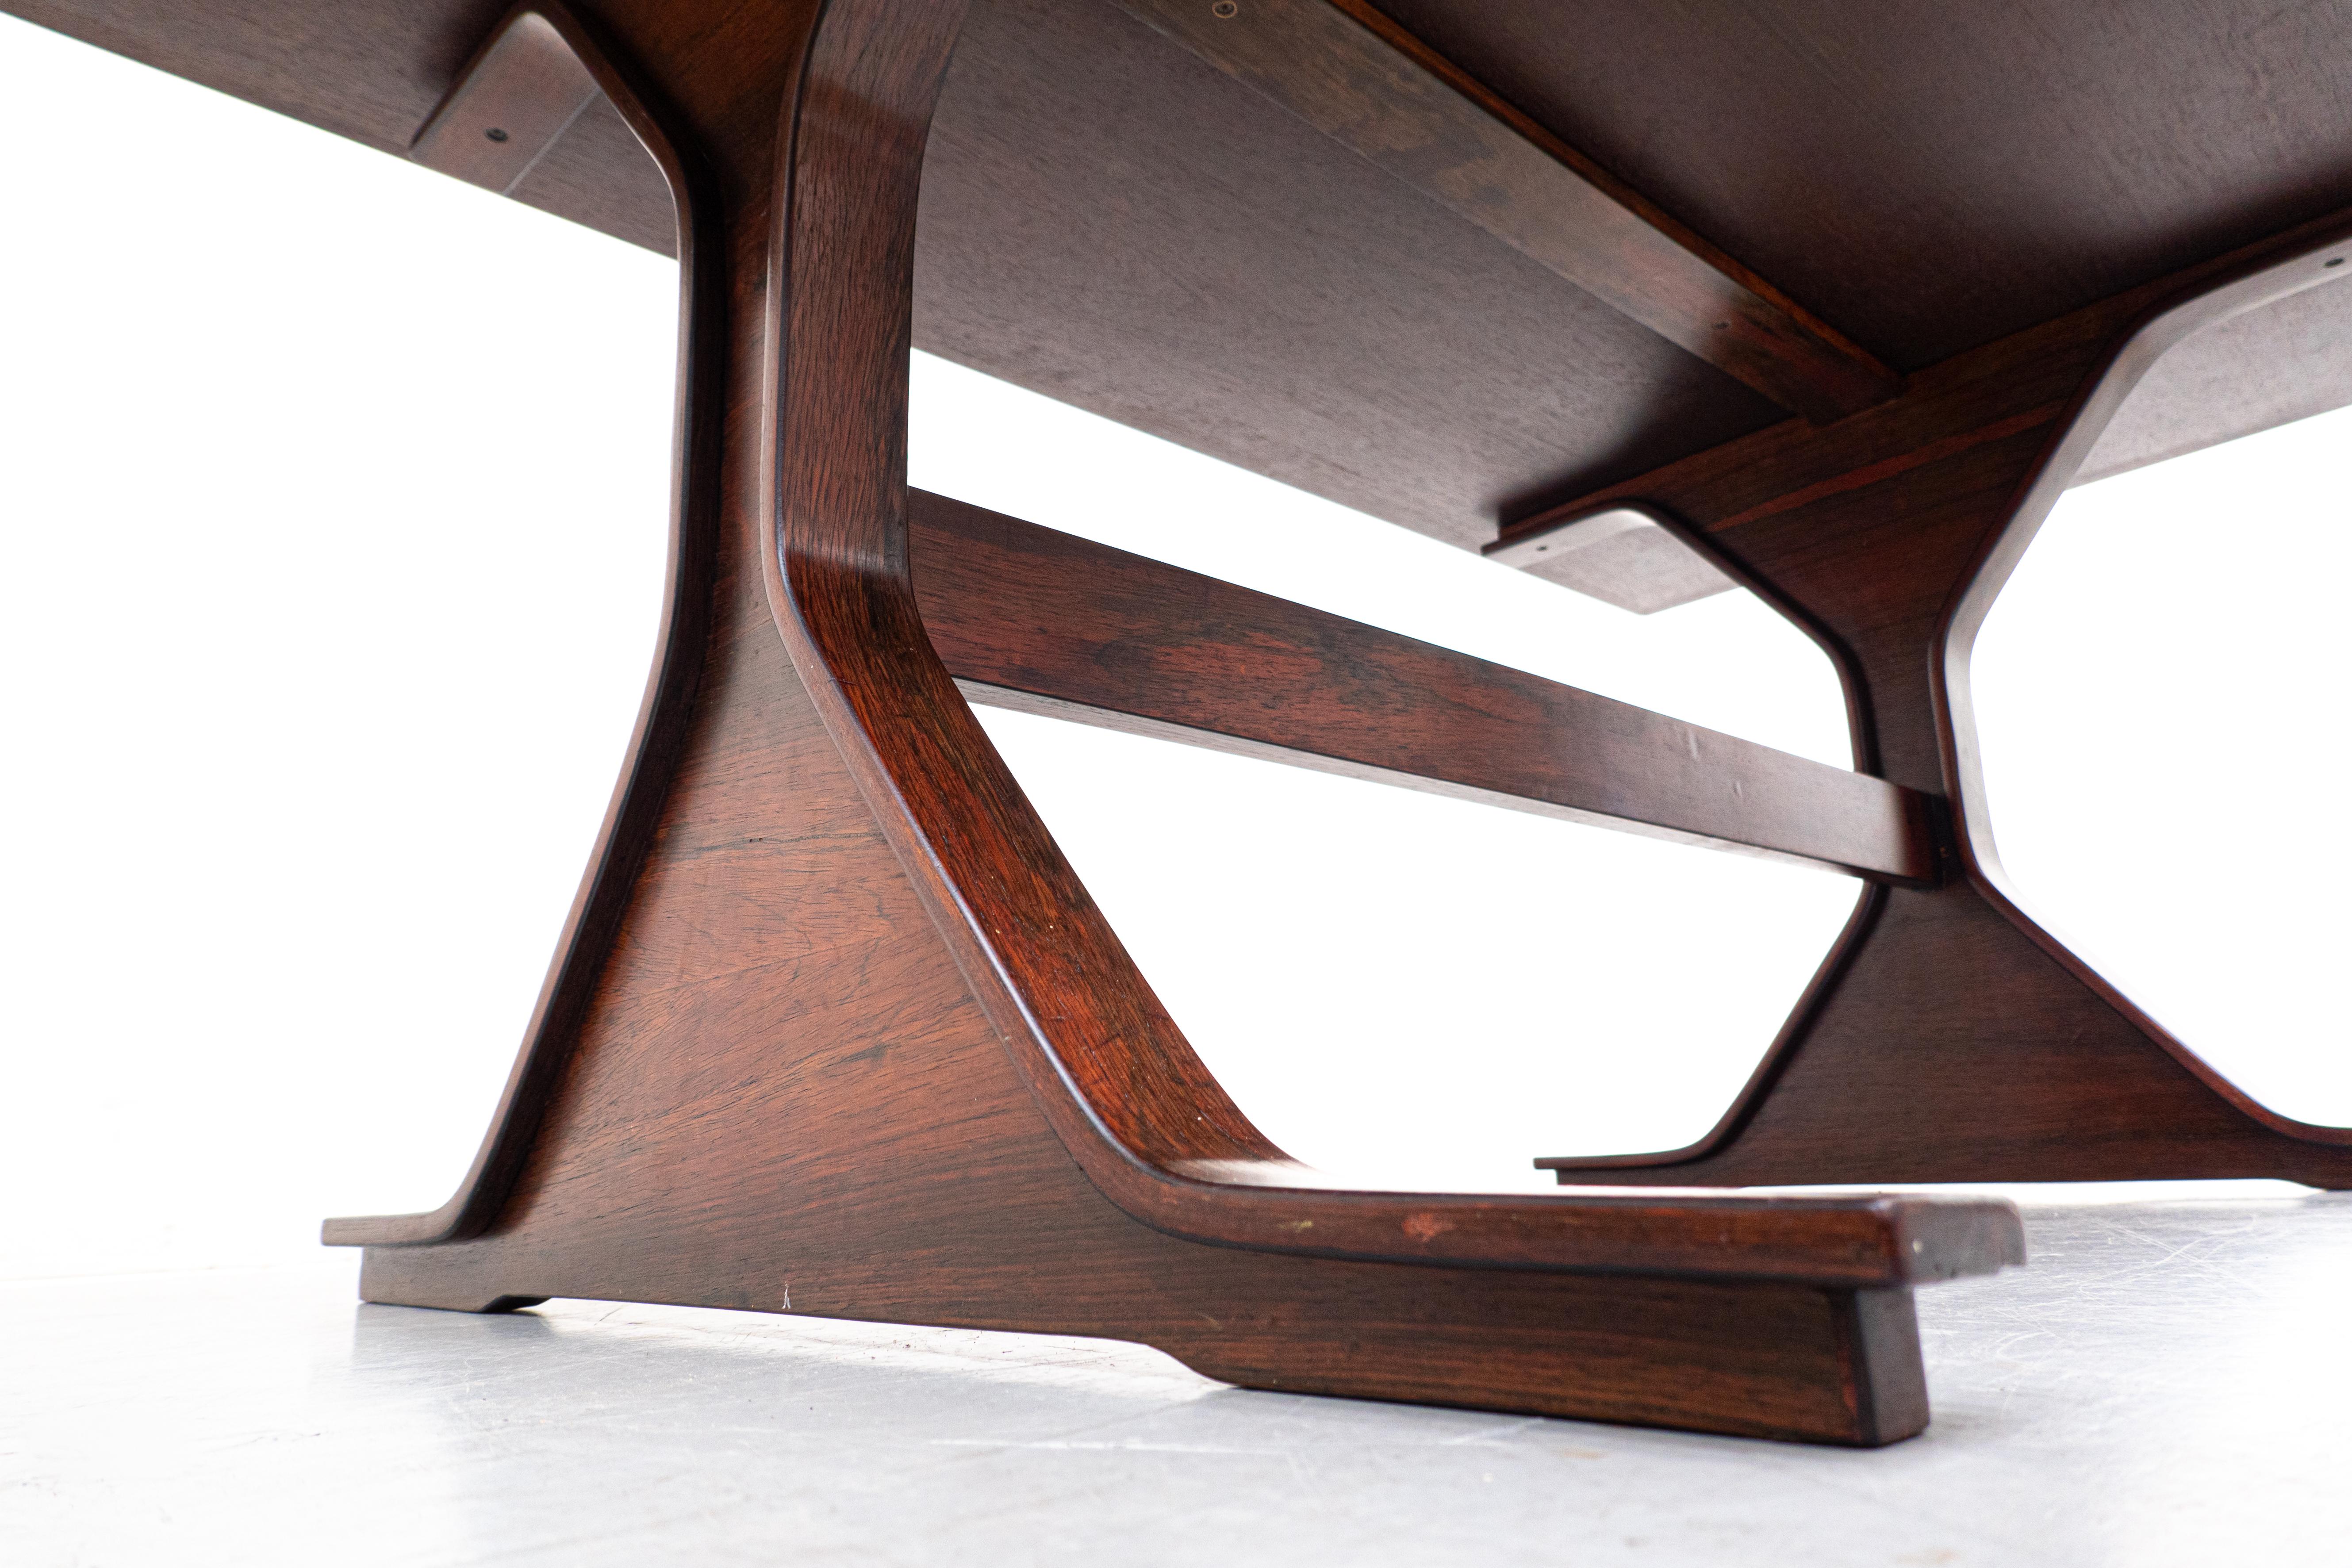 Mid-Century Modern wooden table by Gianfranco Frattini for Bernini, 1960s.